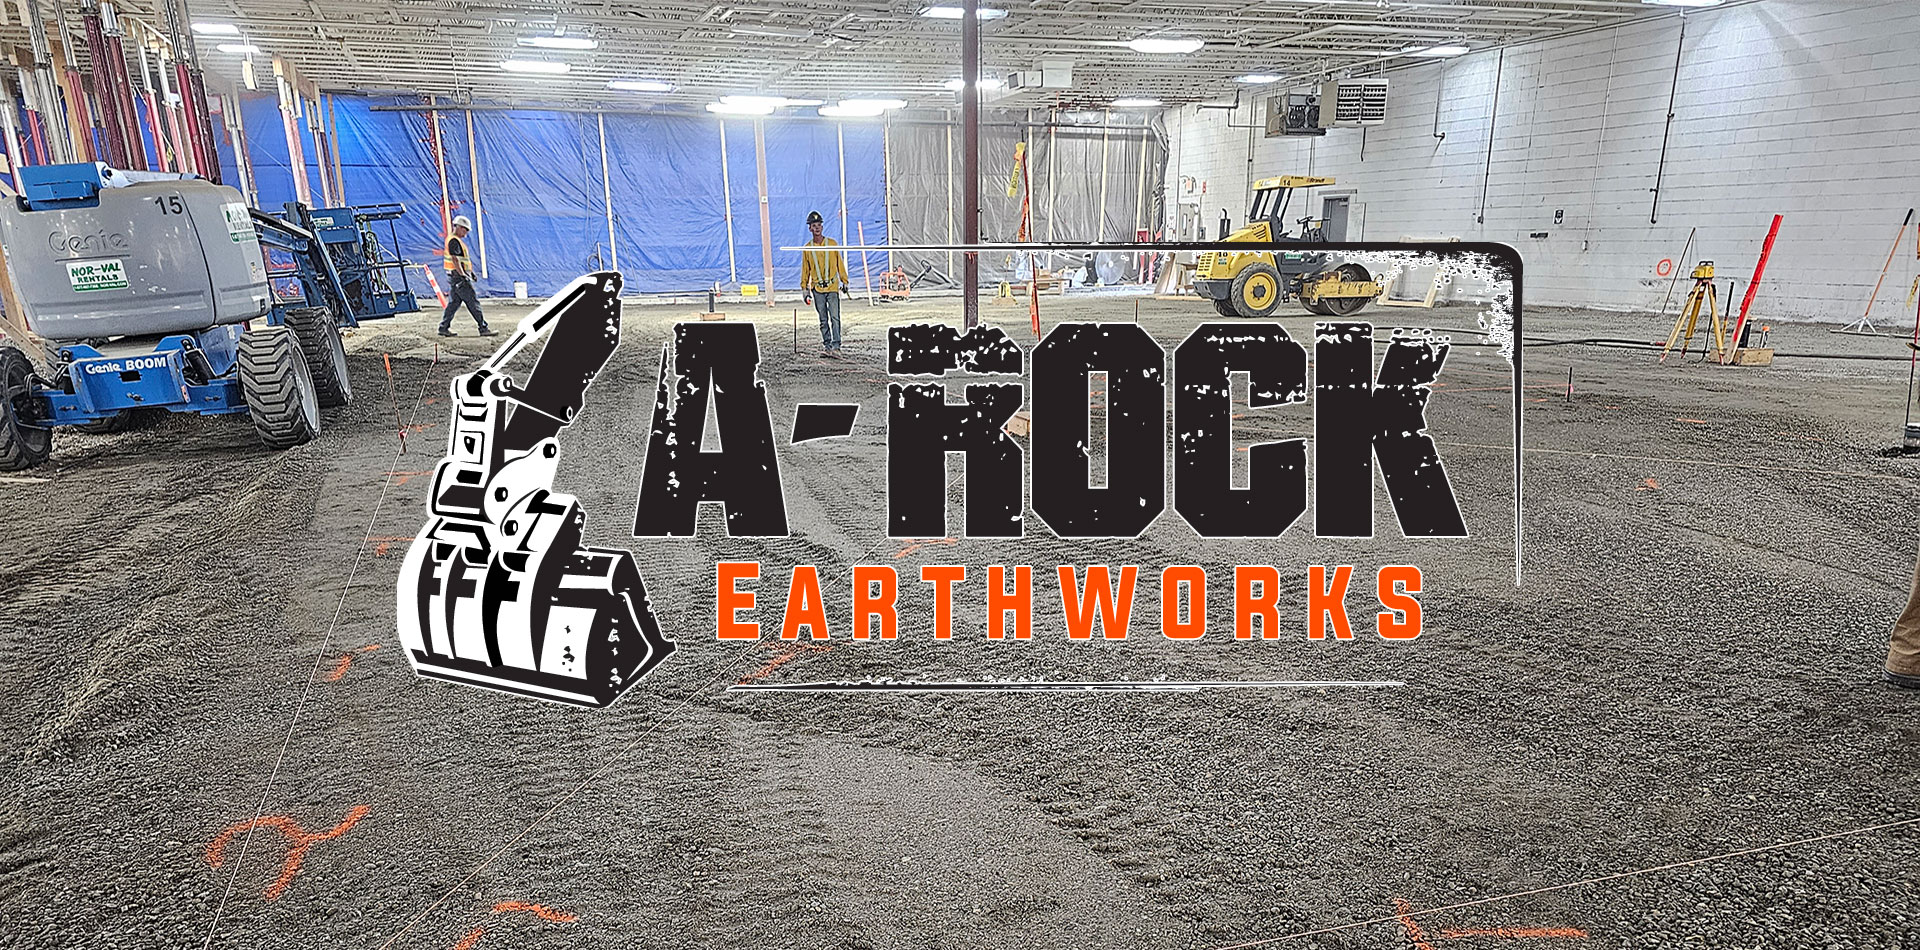 A-Rock Earthworks provides many construction services in and around Kelowna, BC.